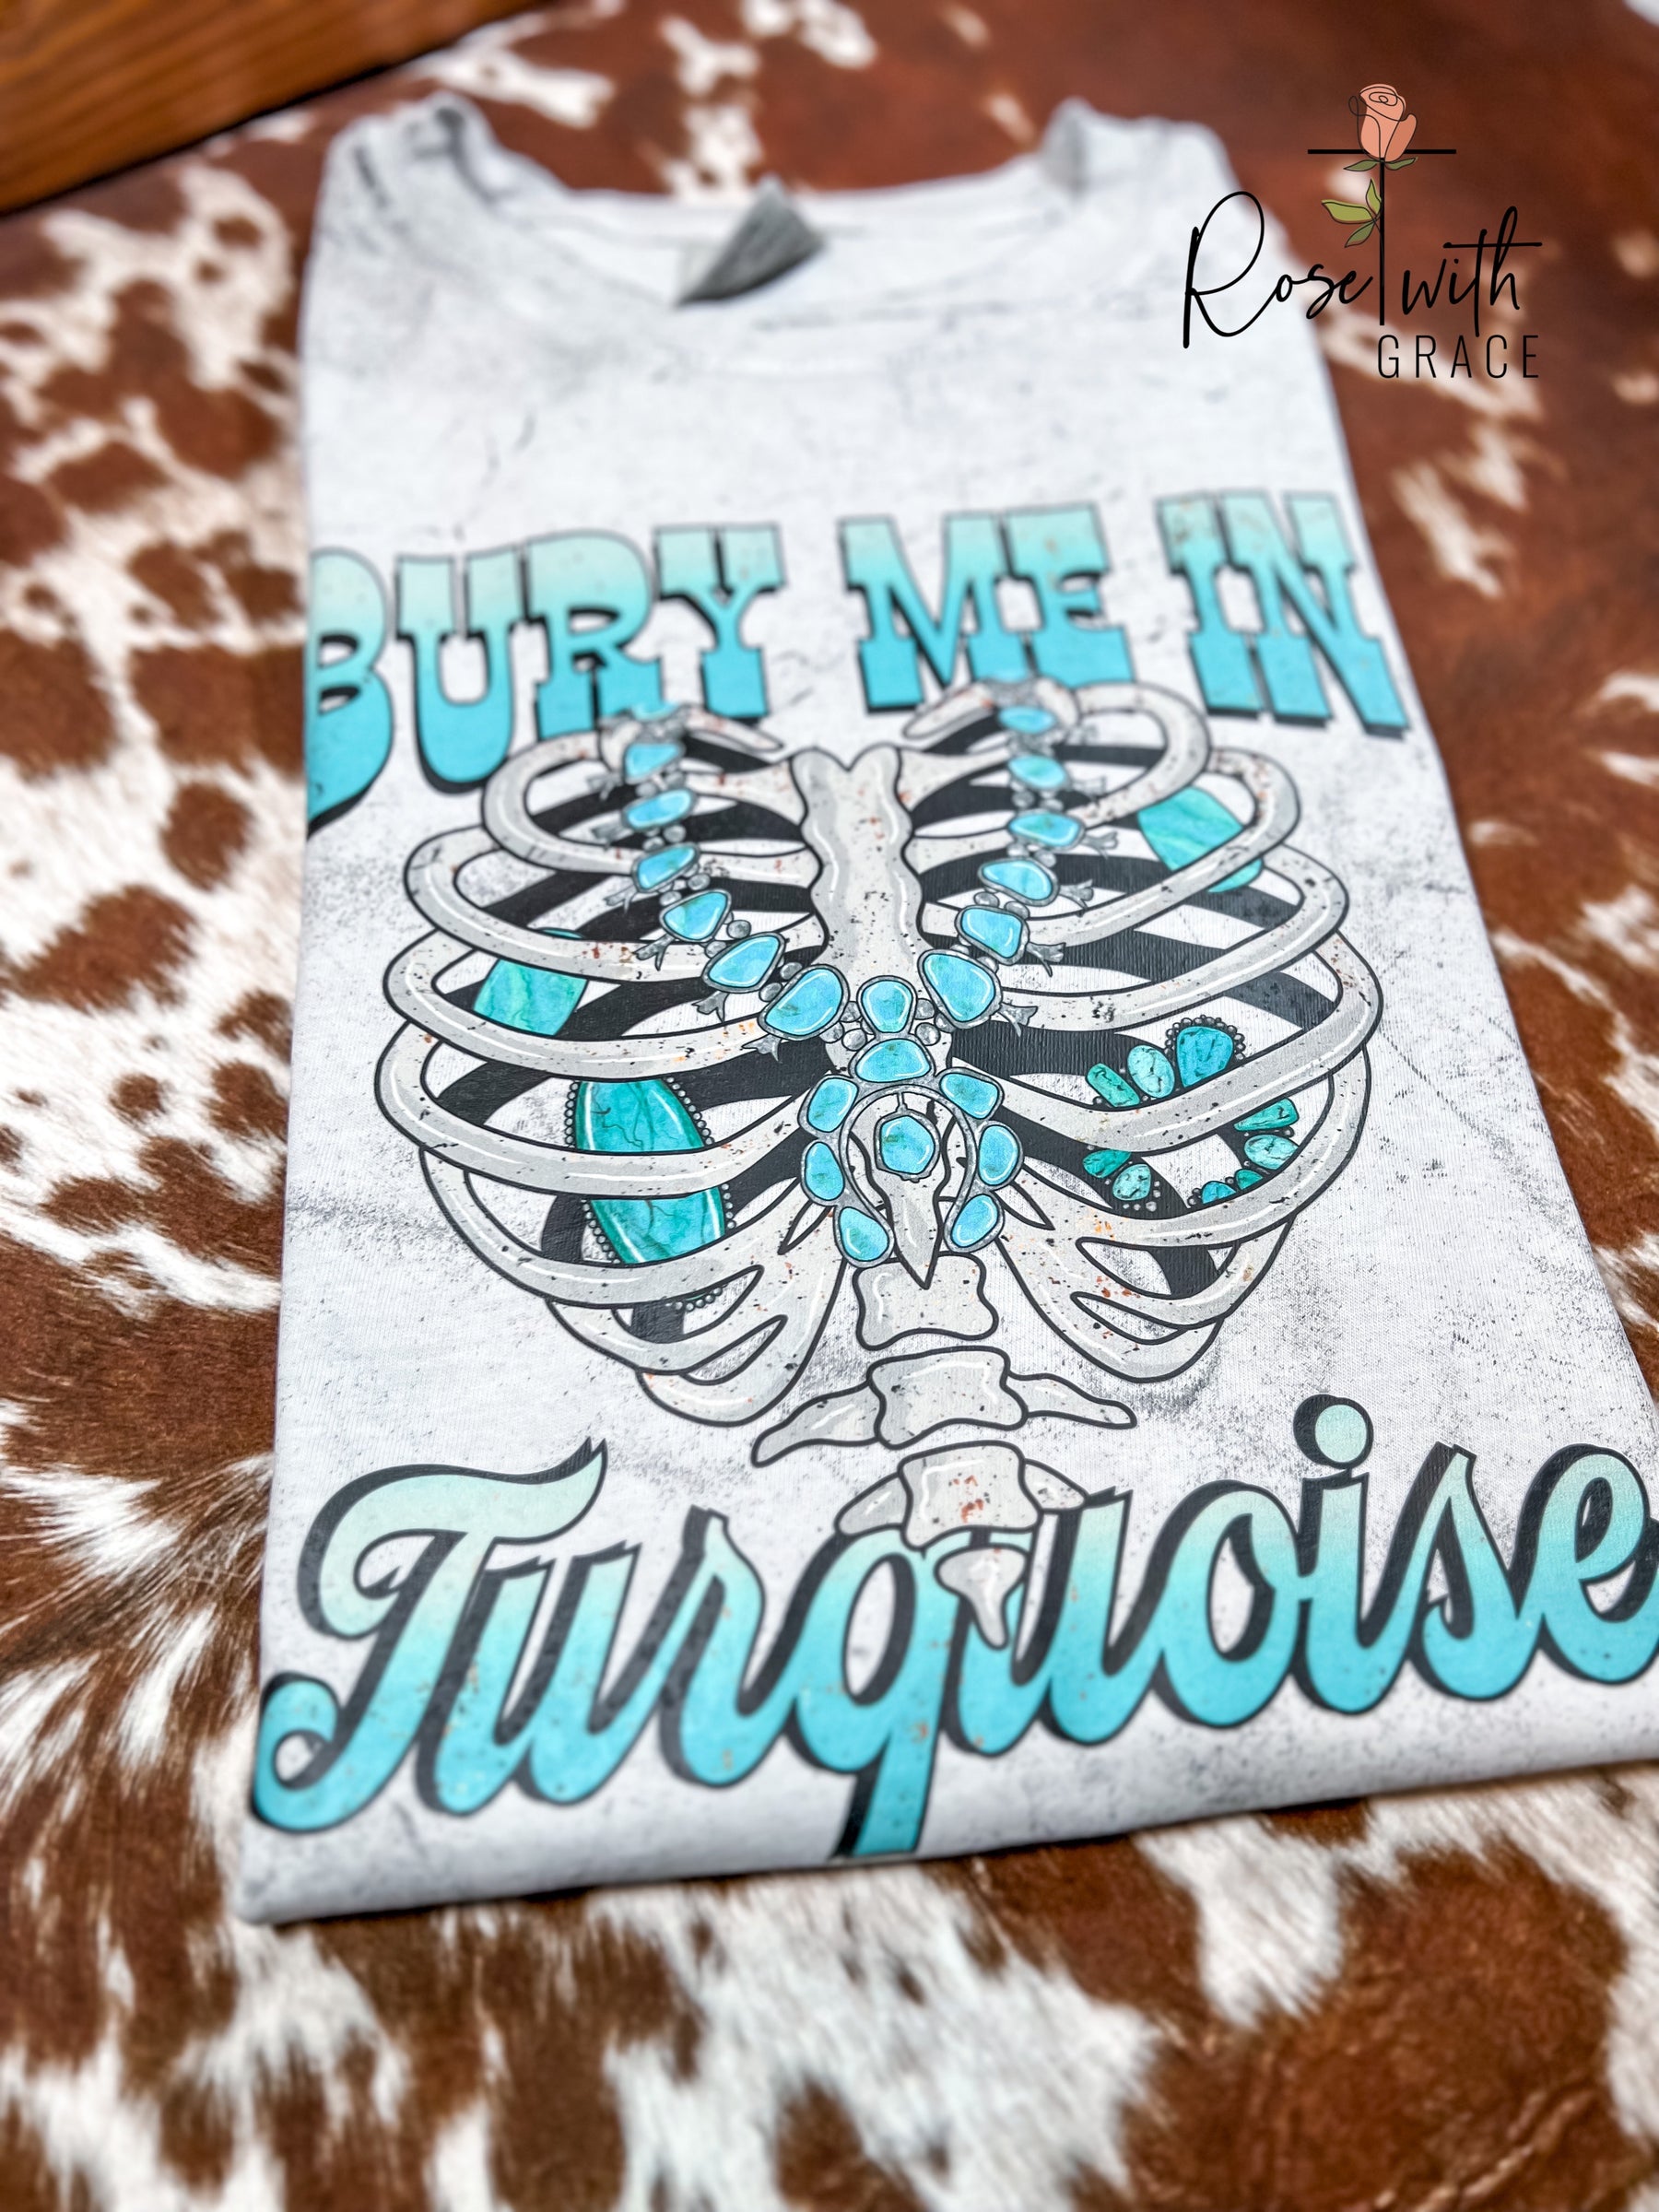 Bury Me in Turquoise - Comfort Colors T-Shirt Rose with Grace LLC